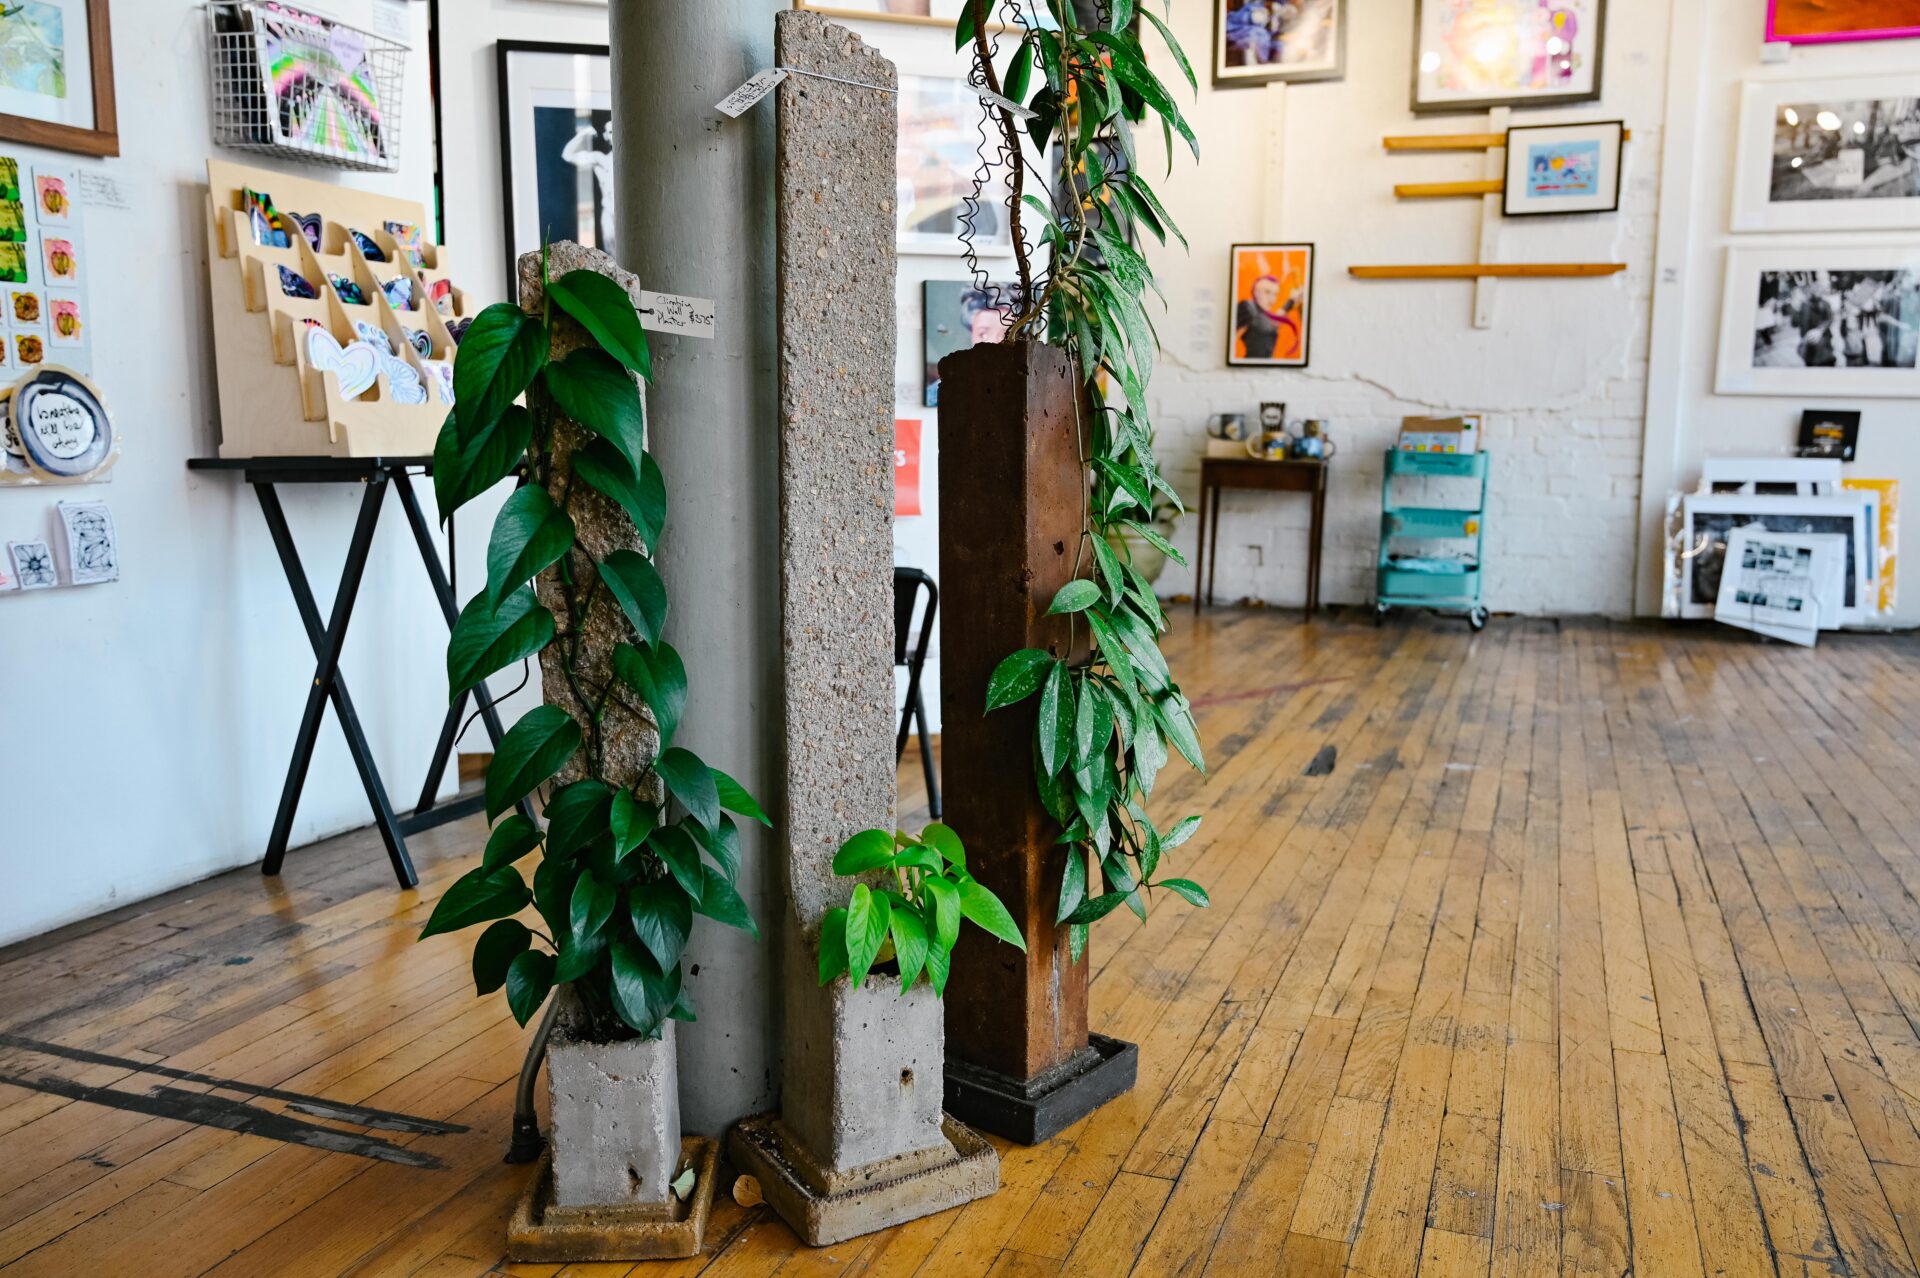 3 cement plant pots with plants sitting on the floor, variety of art is up on the walls behind them